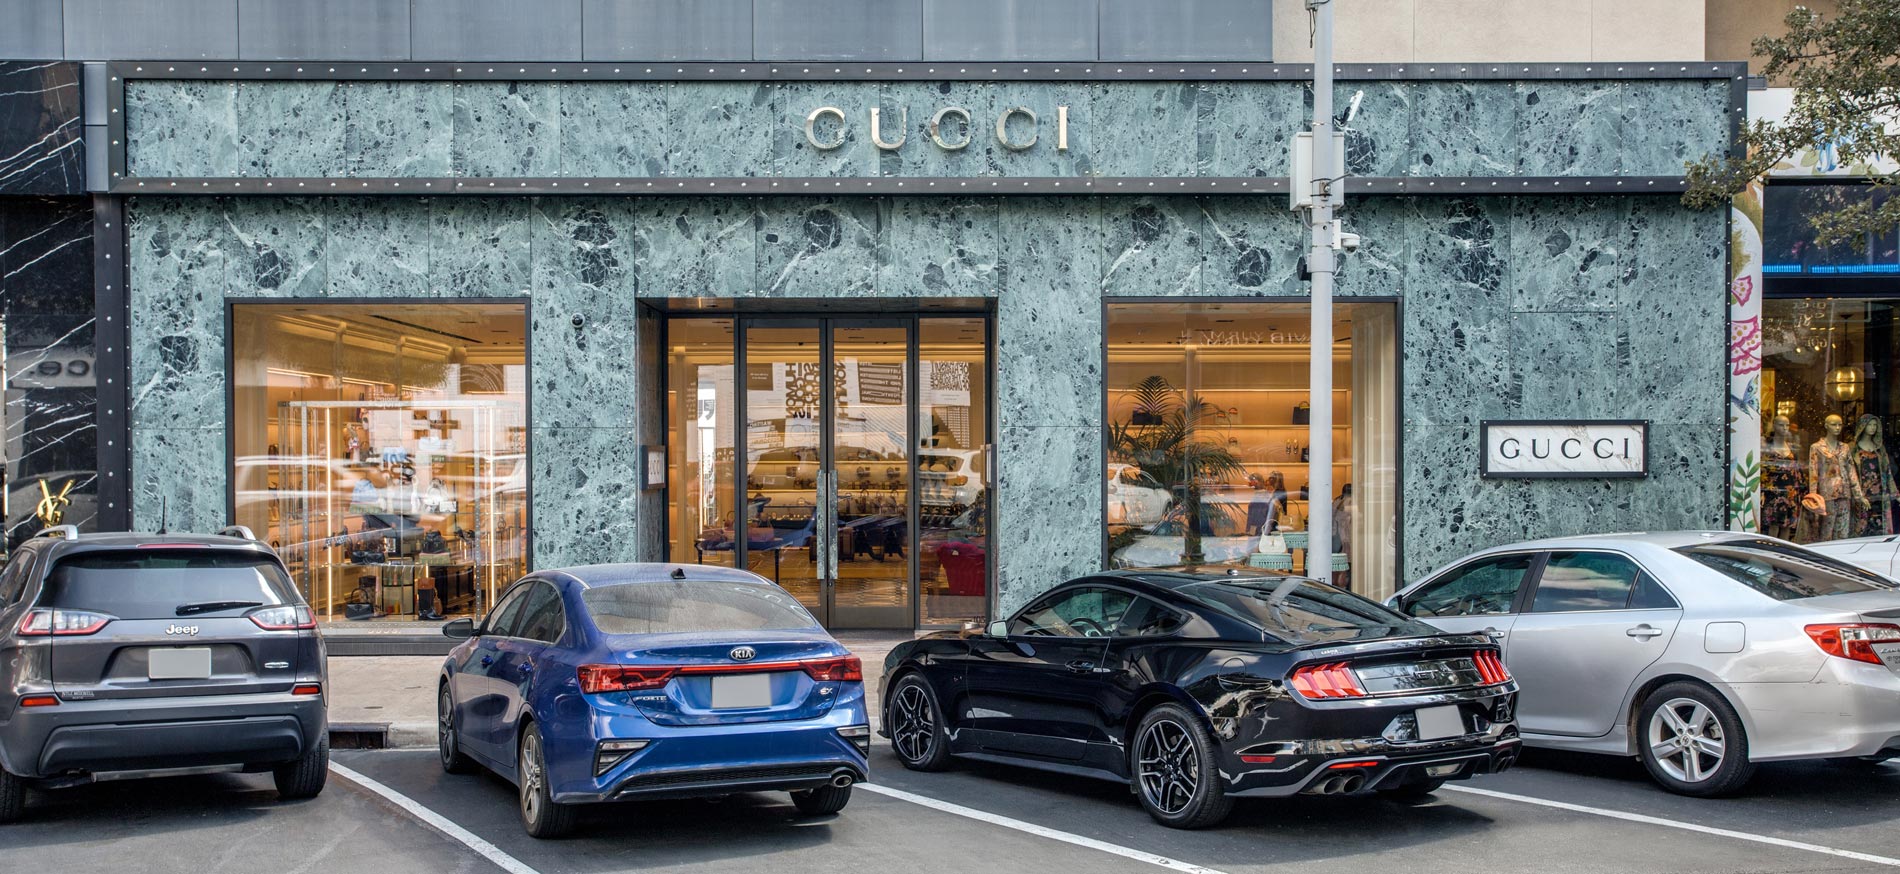 Cars parked in front of Gucci